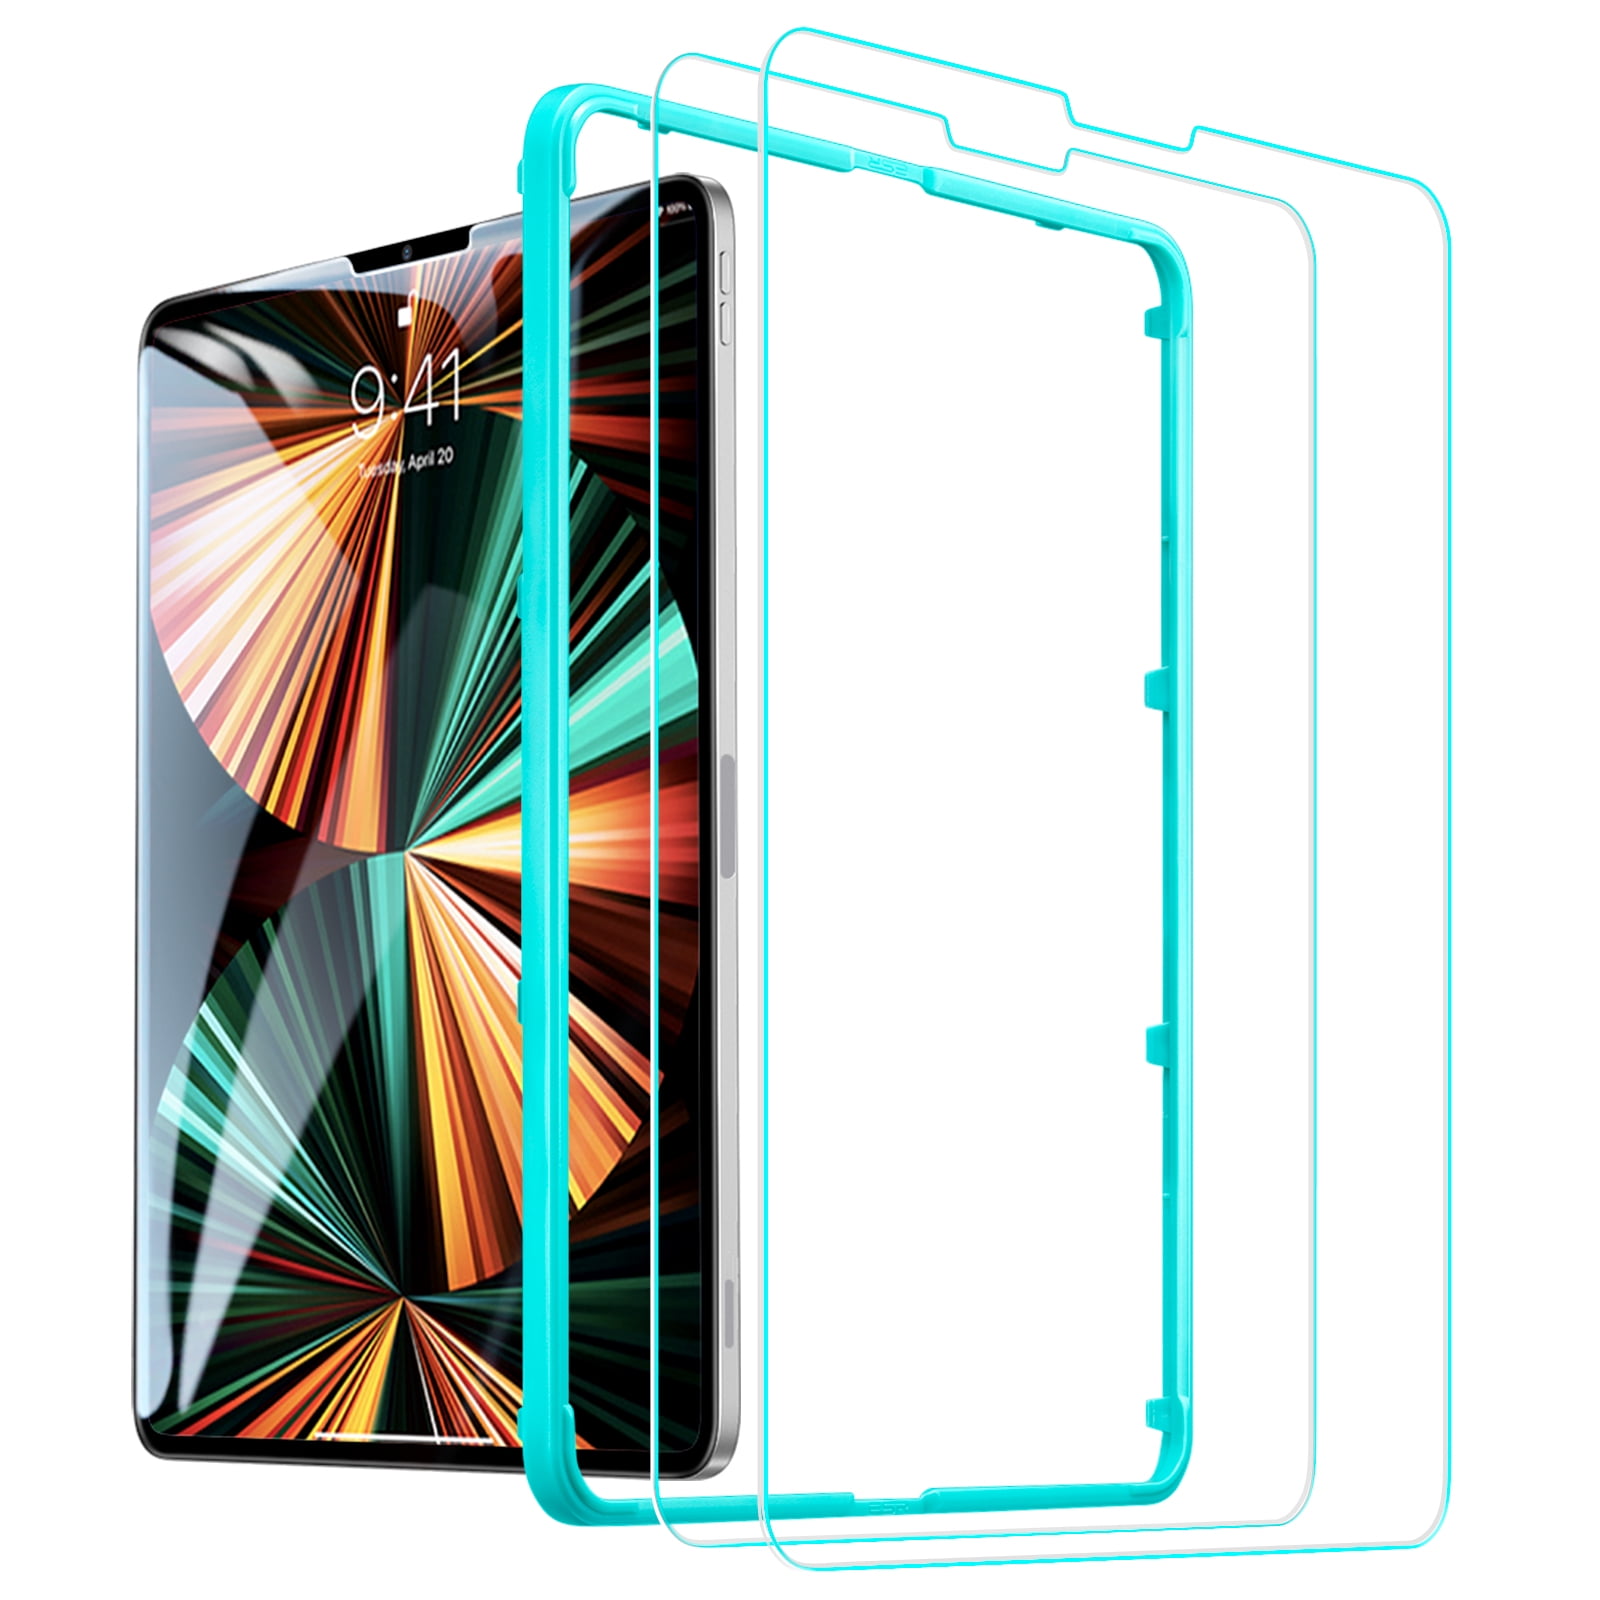 ESR 2 Packs Screen Protector Compatible with iPad Pro 12.9-inch 2021/2020/2018 Model, 5th/4th/3rd Generation Tempered-Glass Flim with self-installation kit